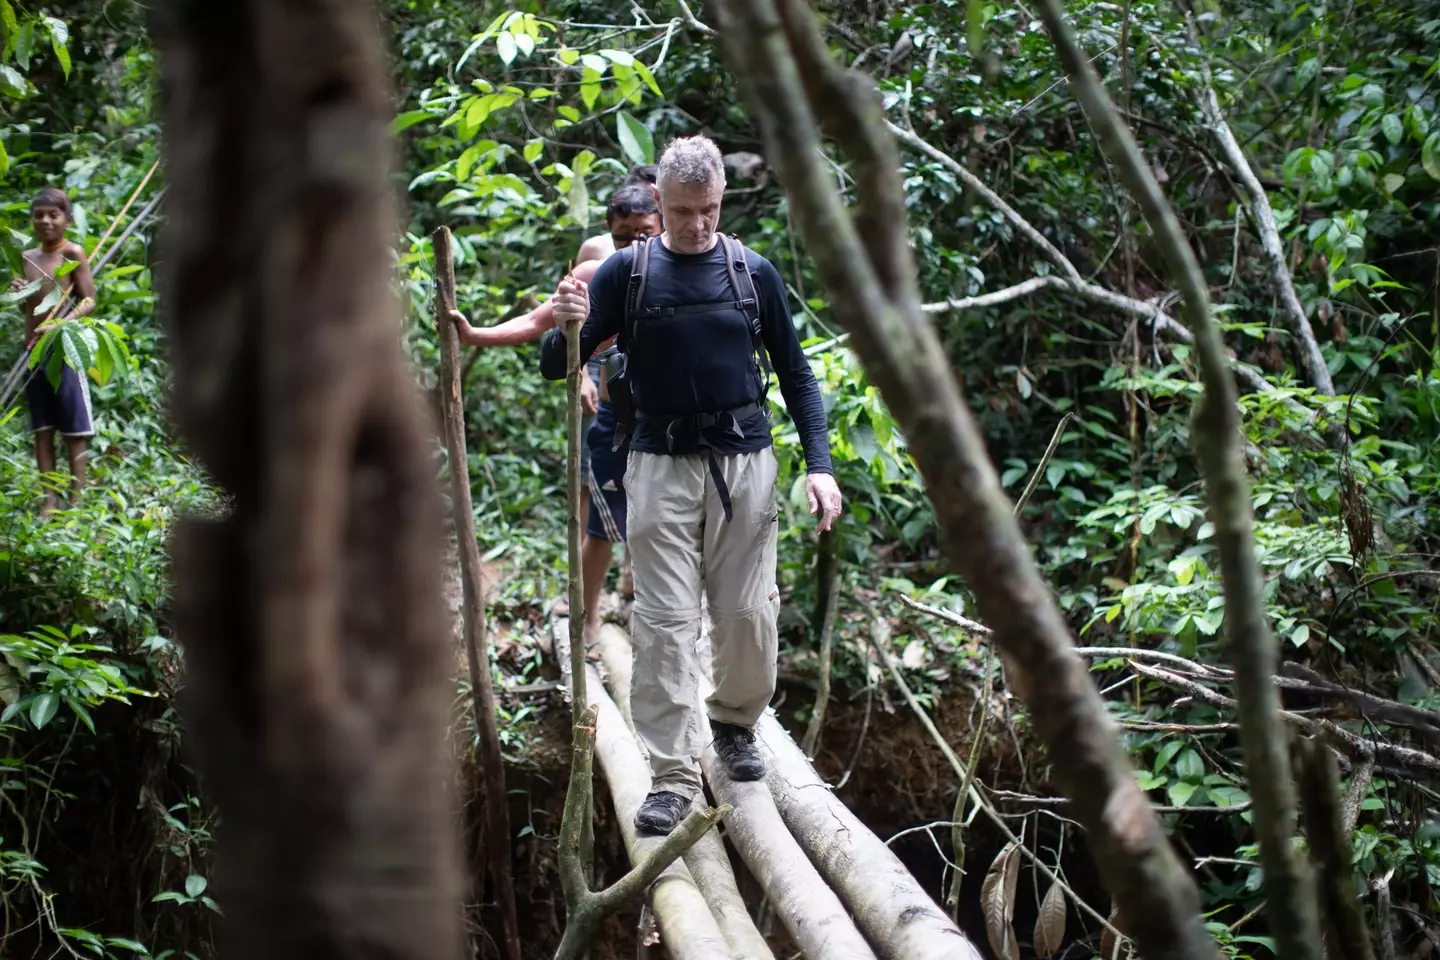 A British journalist has gone missing in the Amazon rainforest.